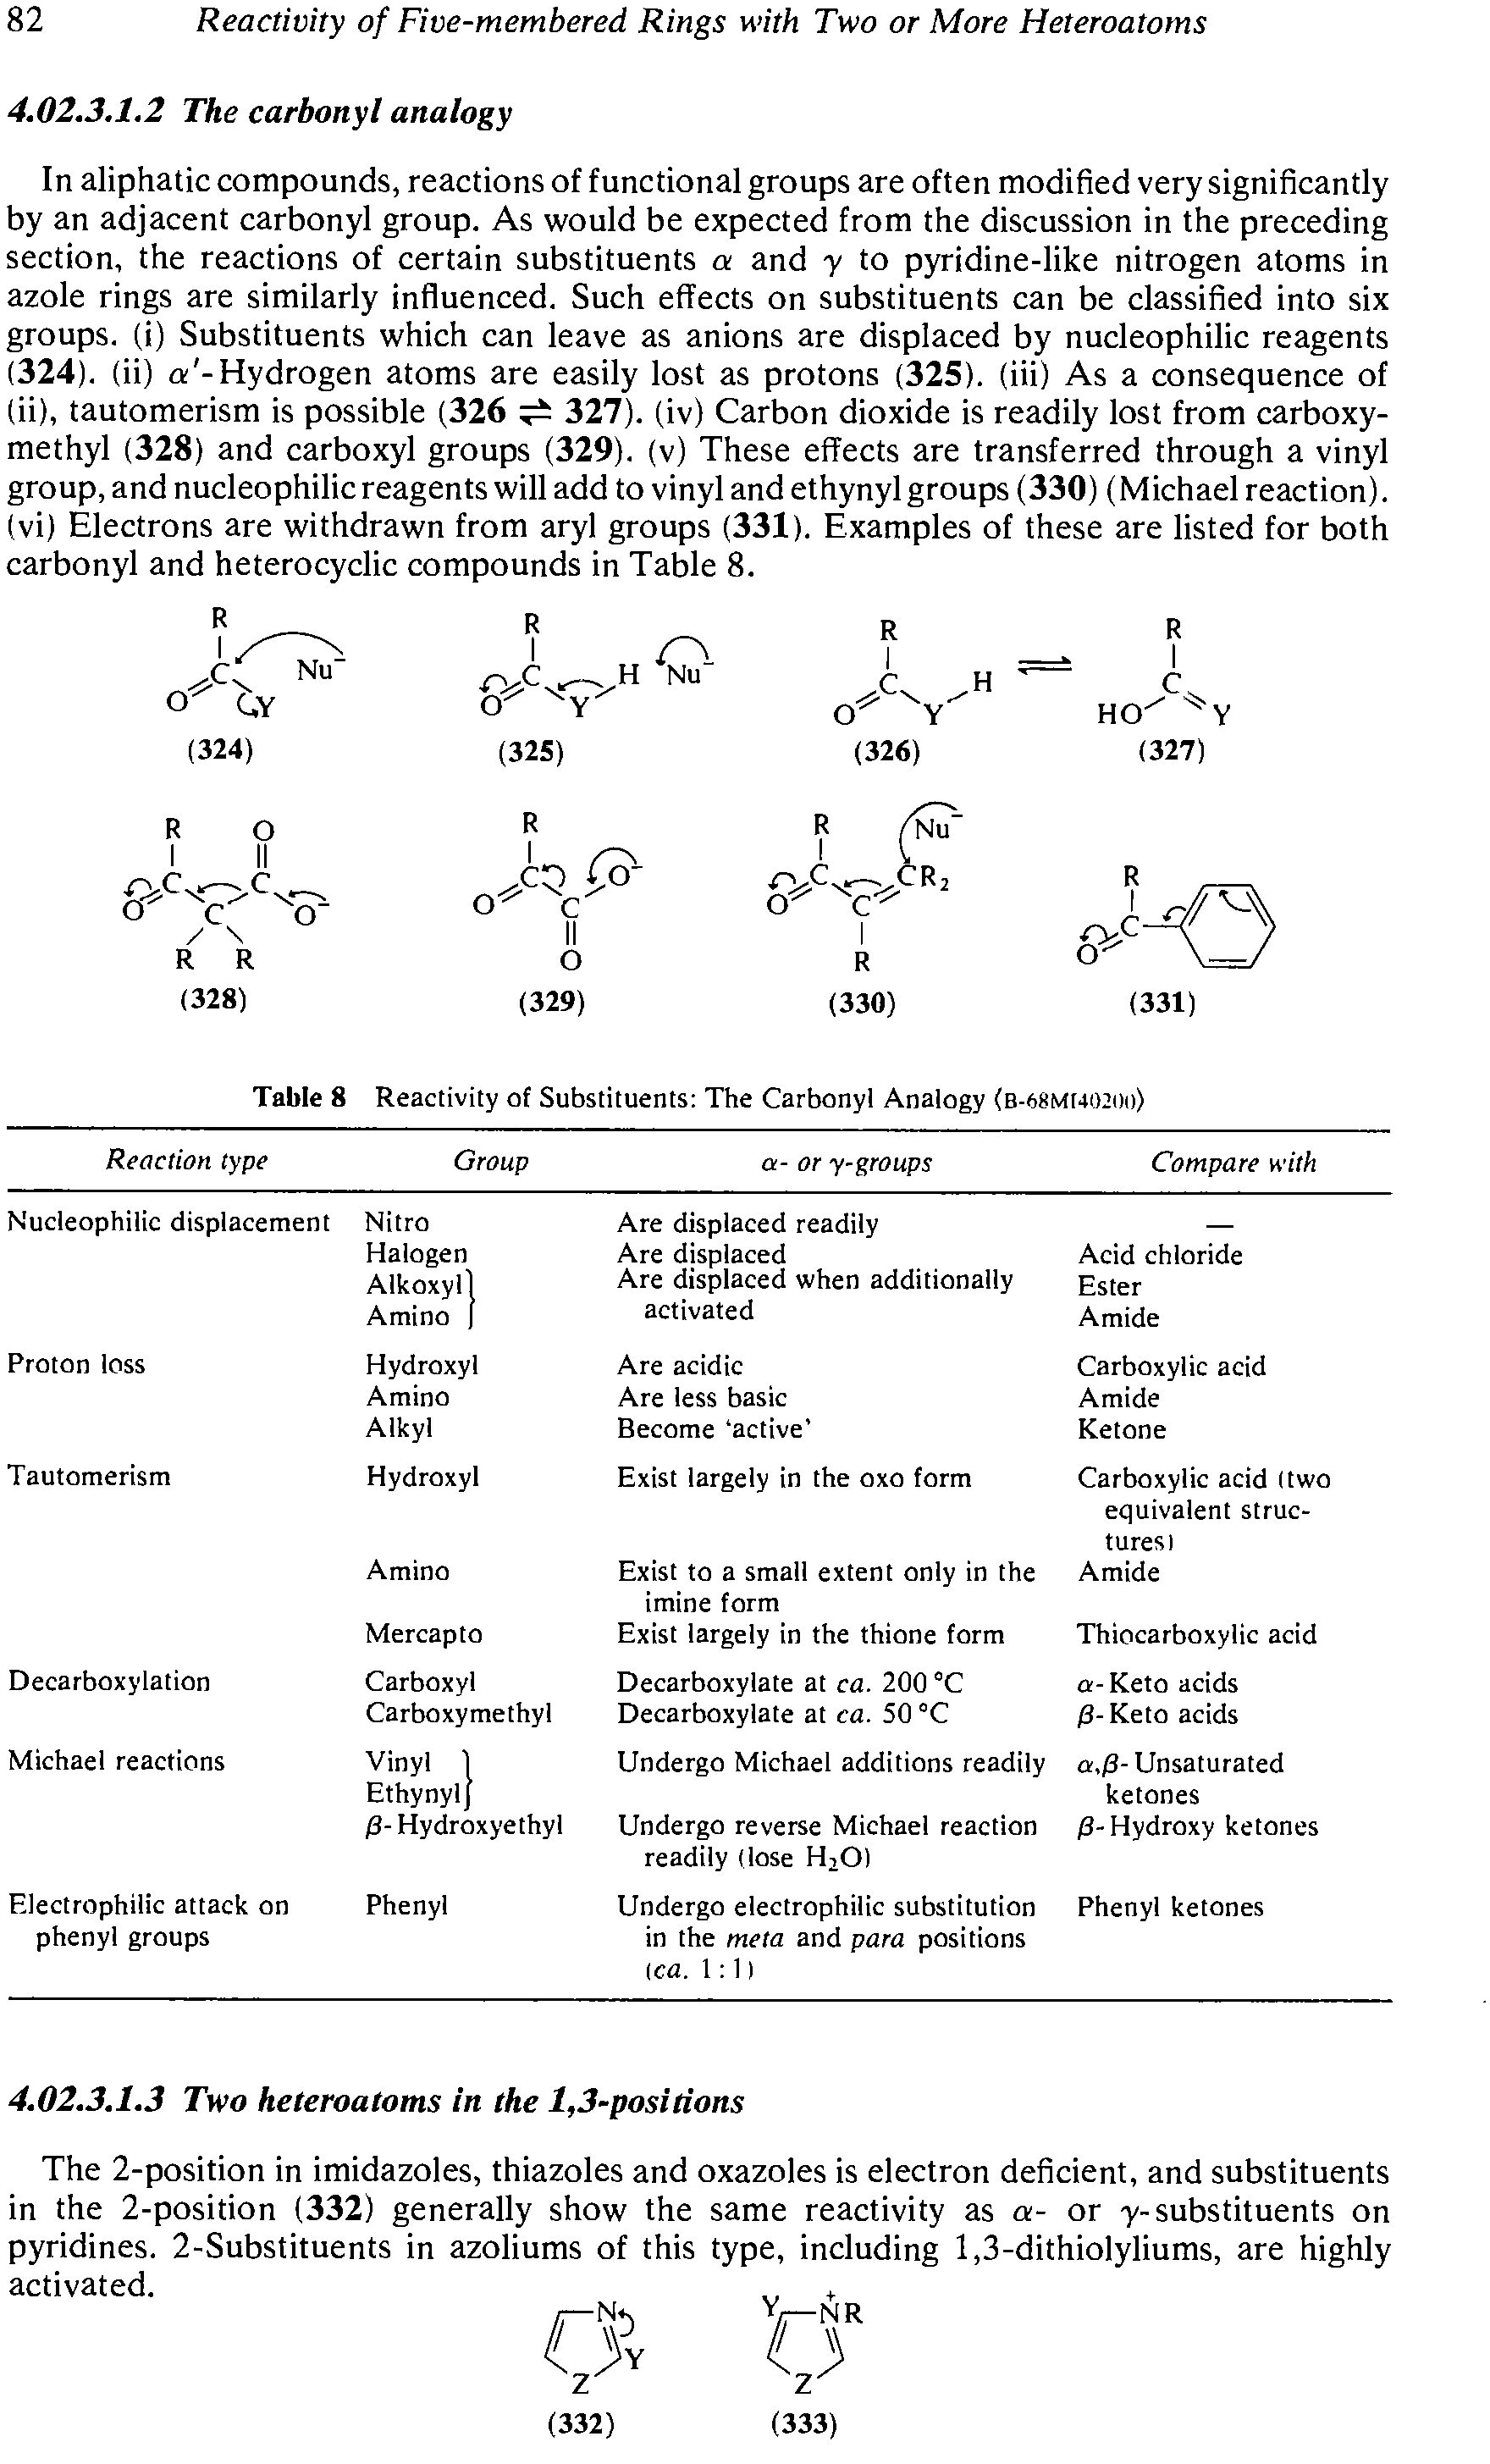 Table 8 Reactivity of Substituents The Carbonyl Analogy (B-68Mt4020o)...